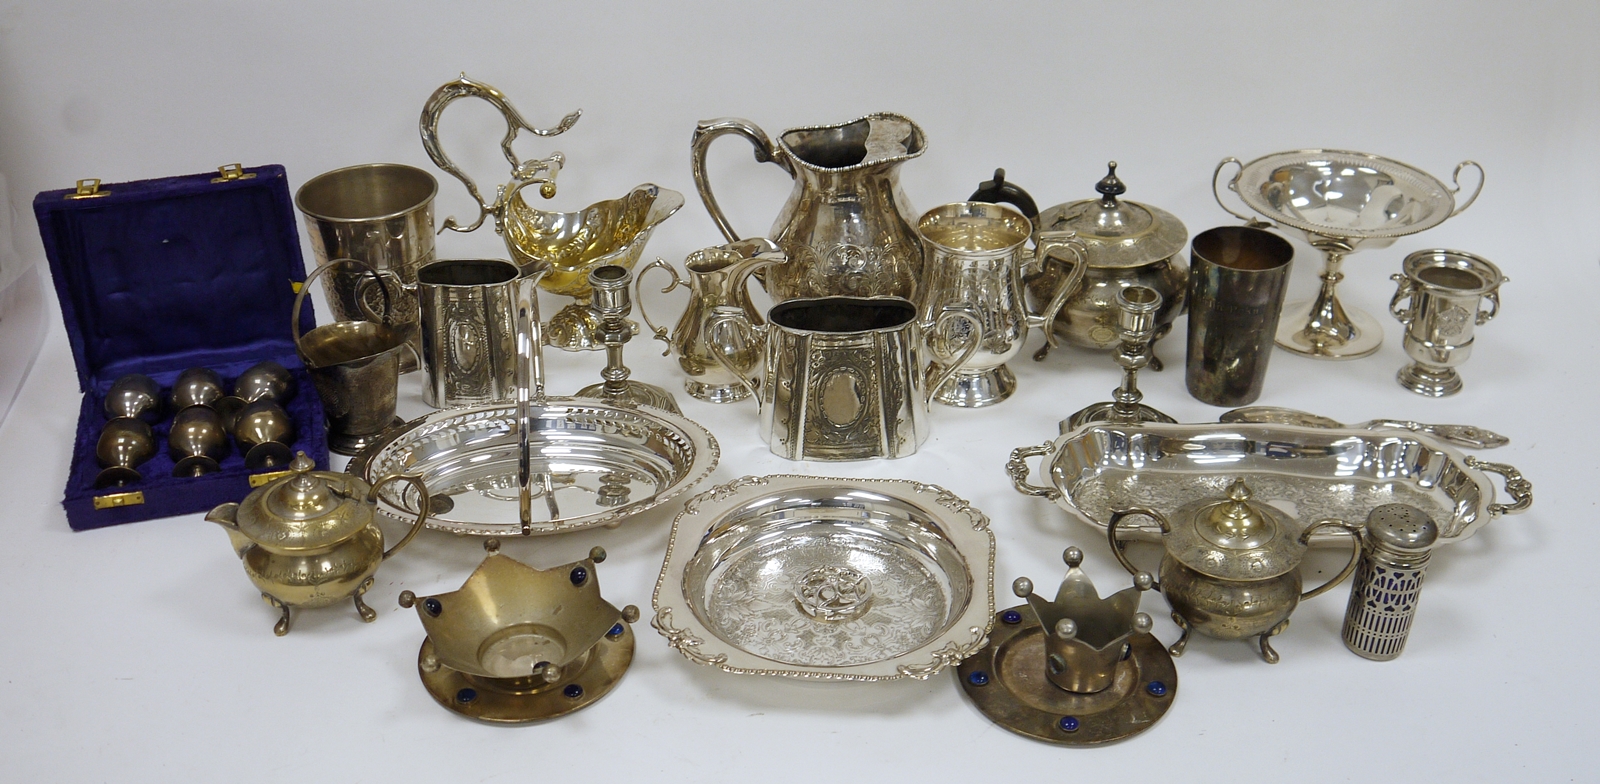 Collection of Edwardian and later silver plate including an engraved part tea service, pierced